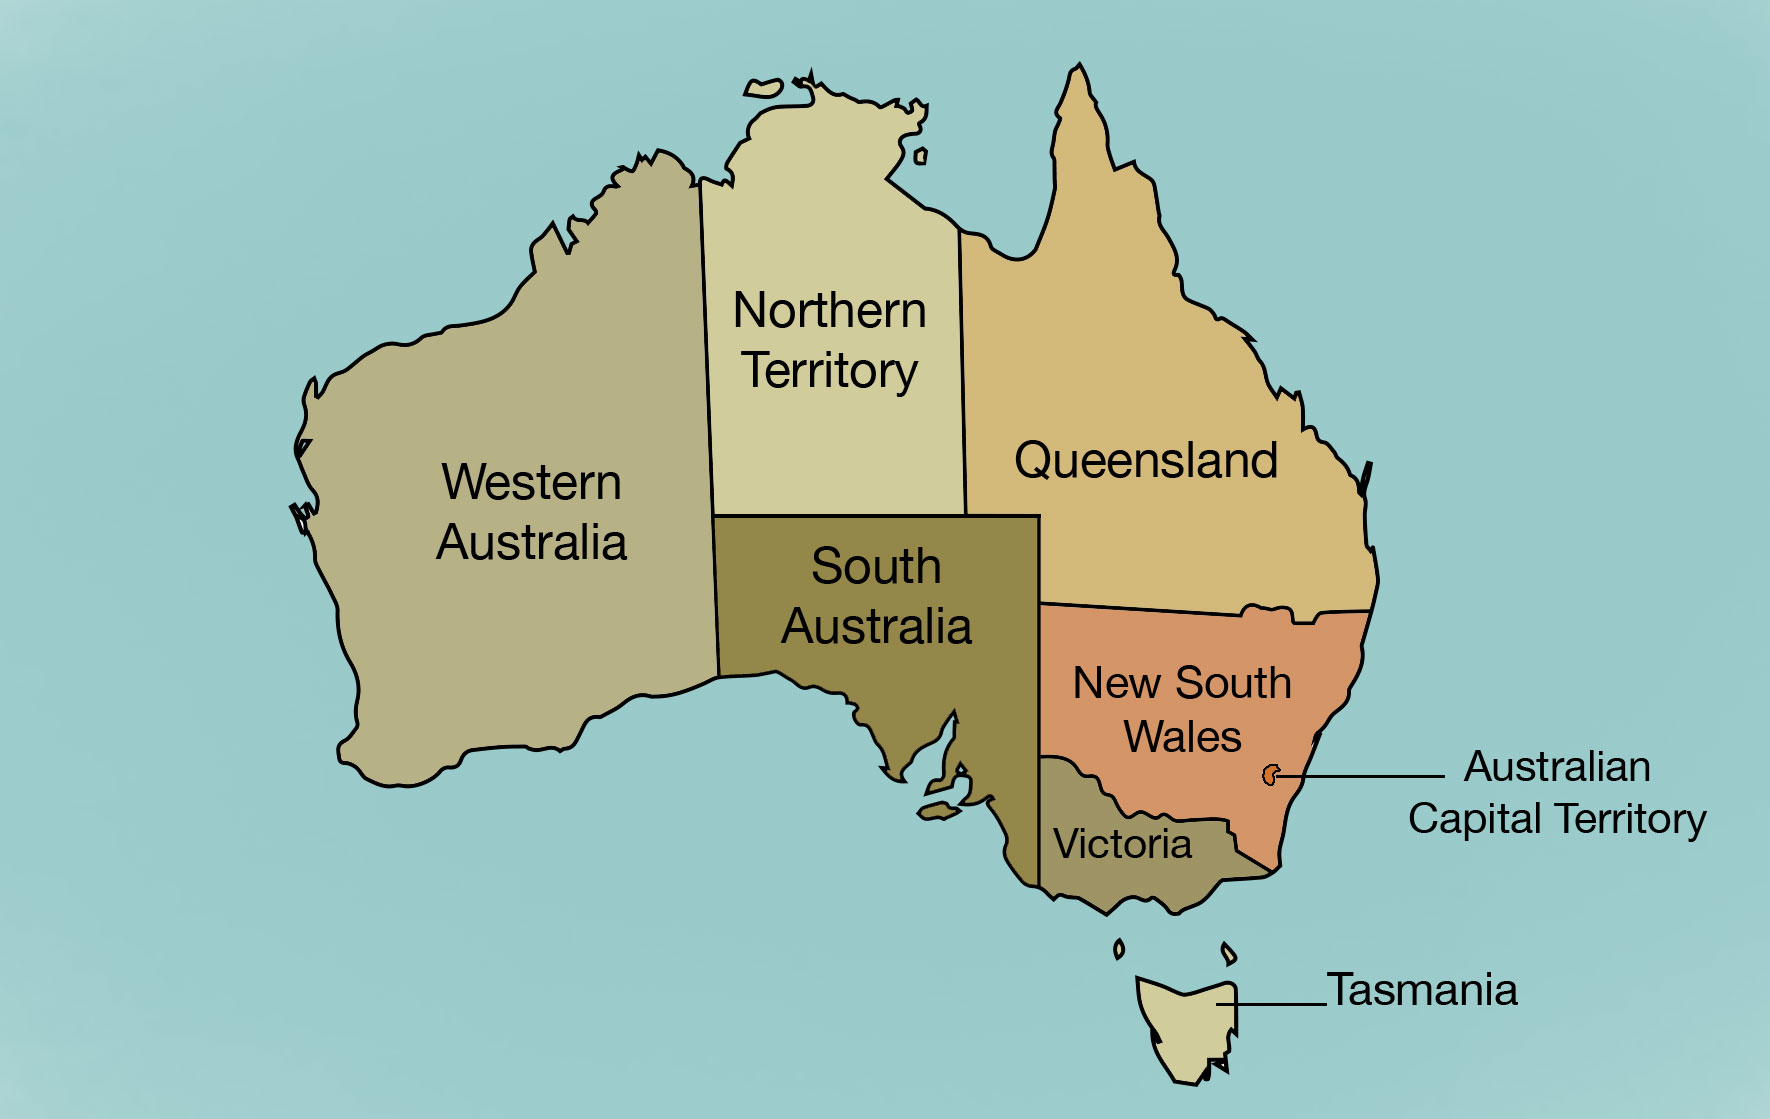 Map of Australia, showing states and territories